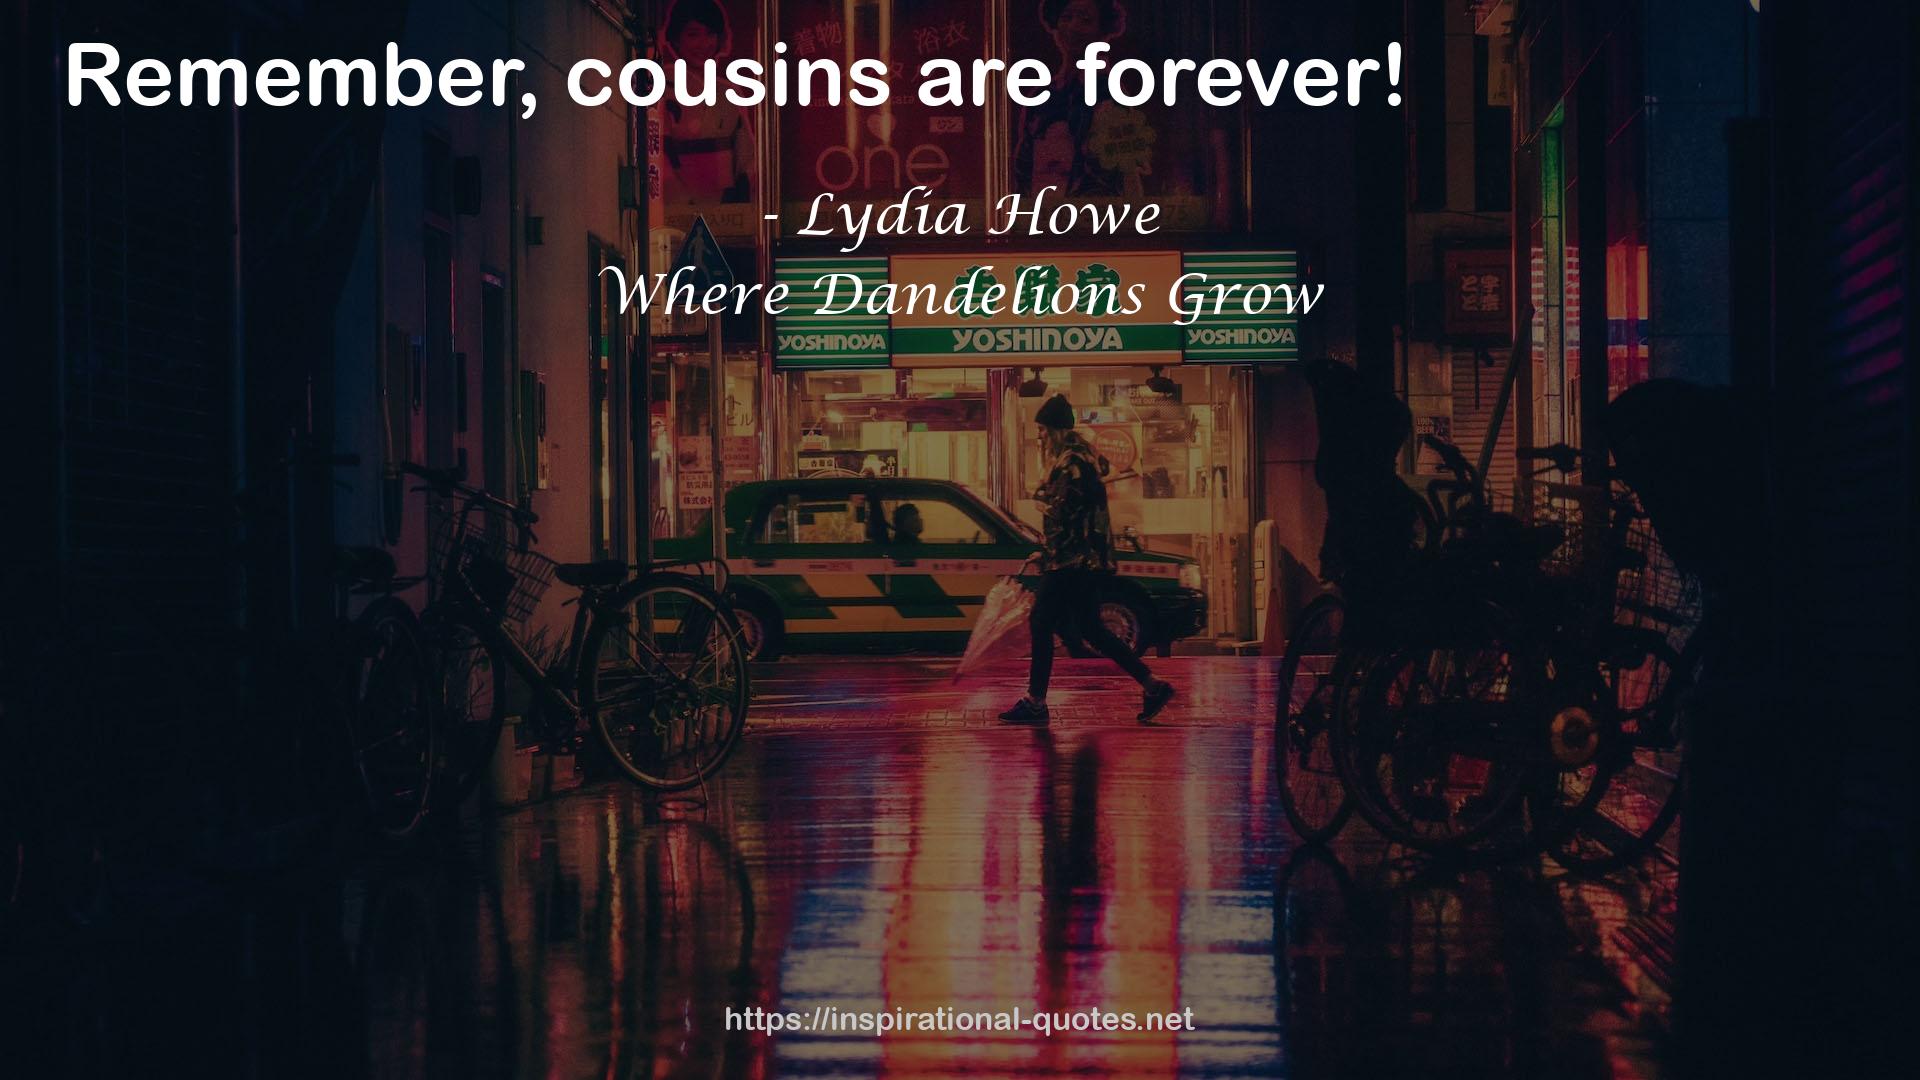 Lydia Howe QUOTES